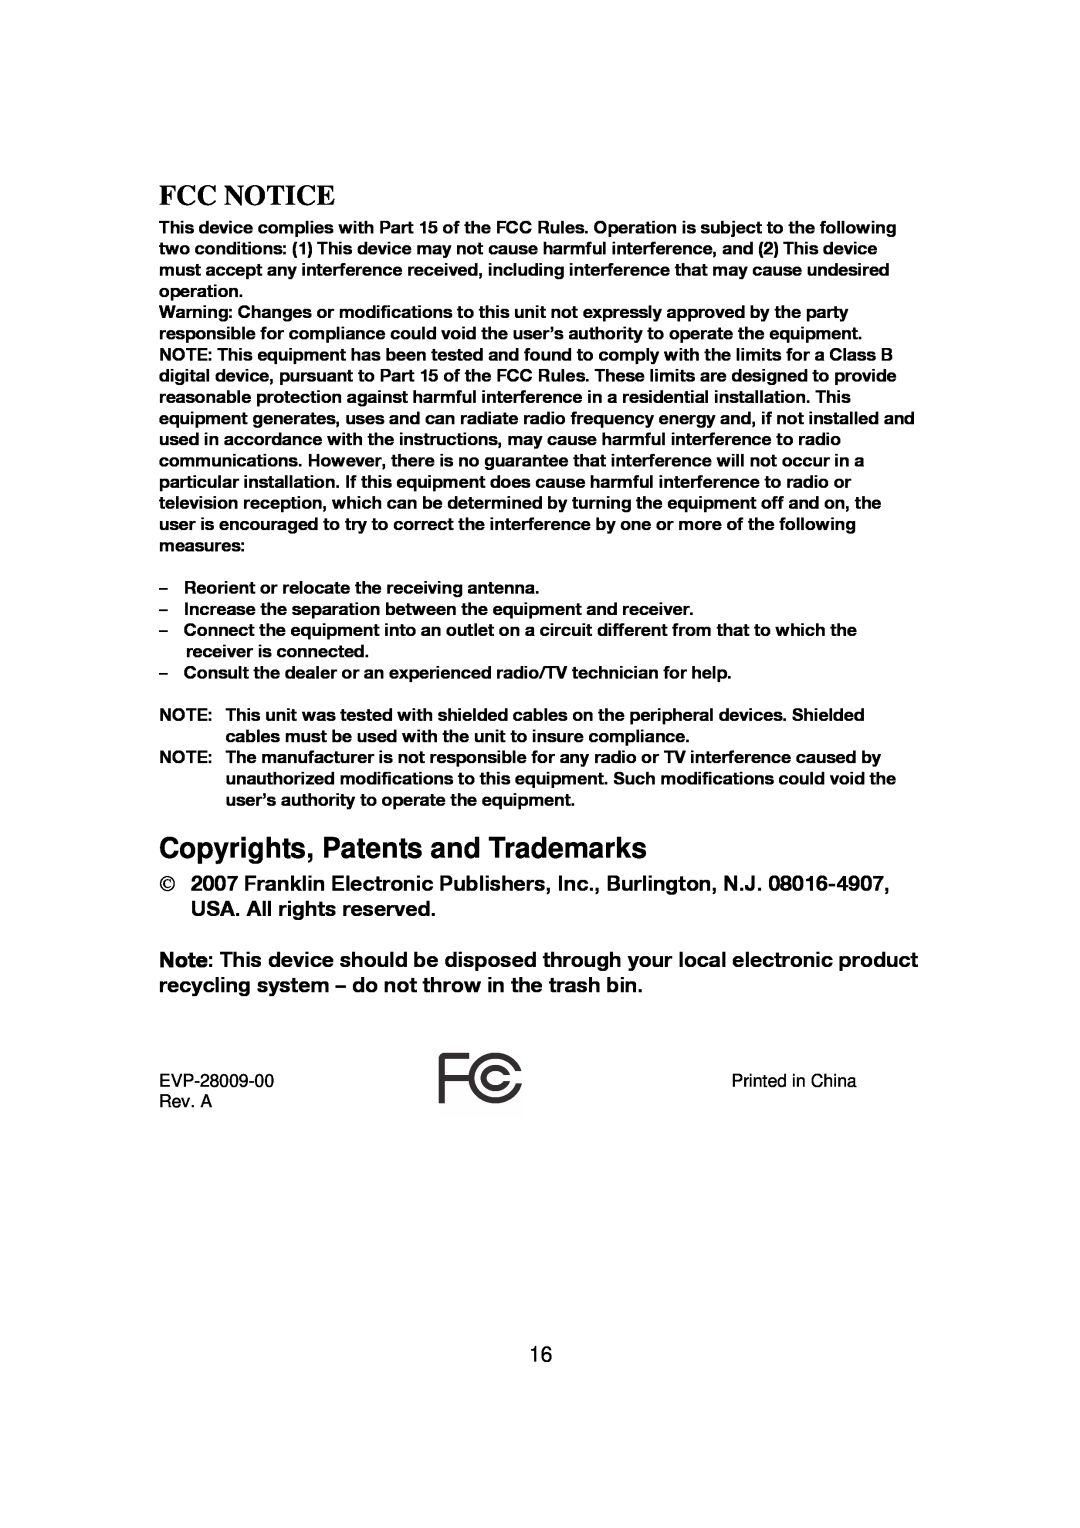 Franklin CBC-100 manual Fcc Notice, Copyrights, Patents and Trademarks 